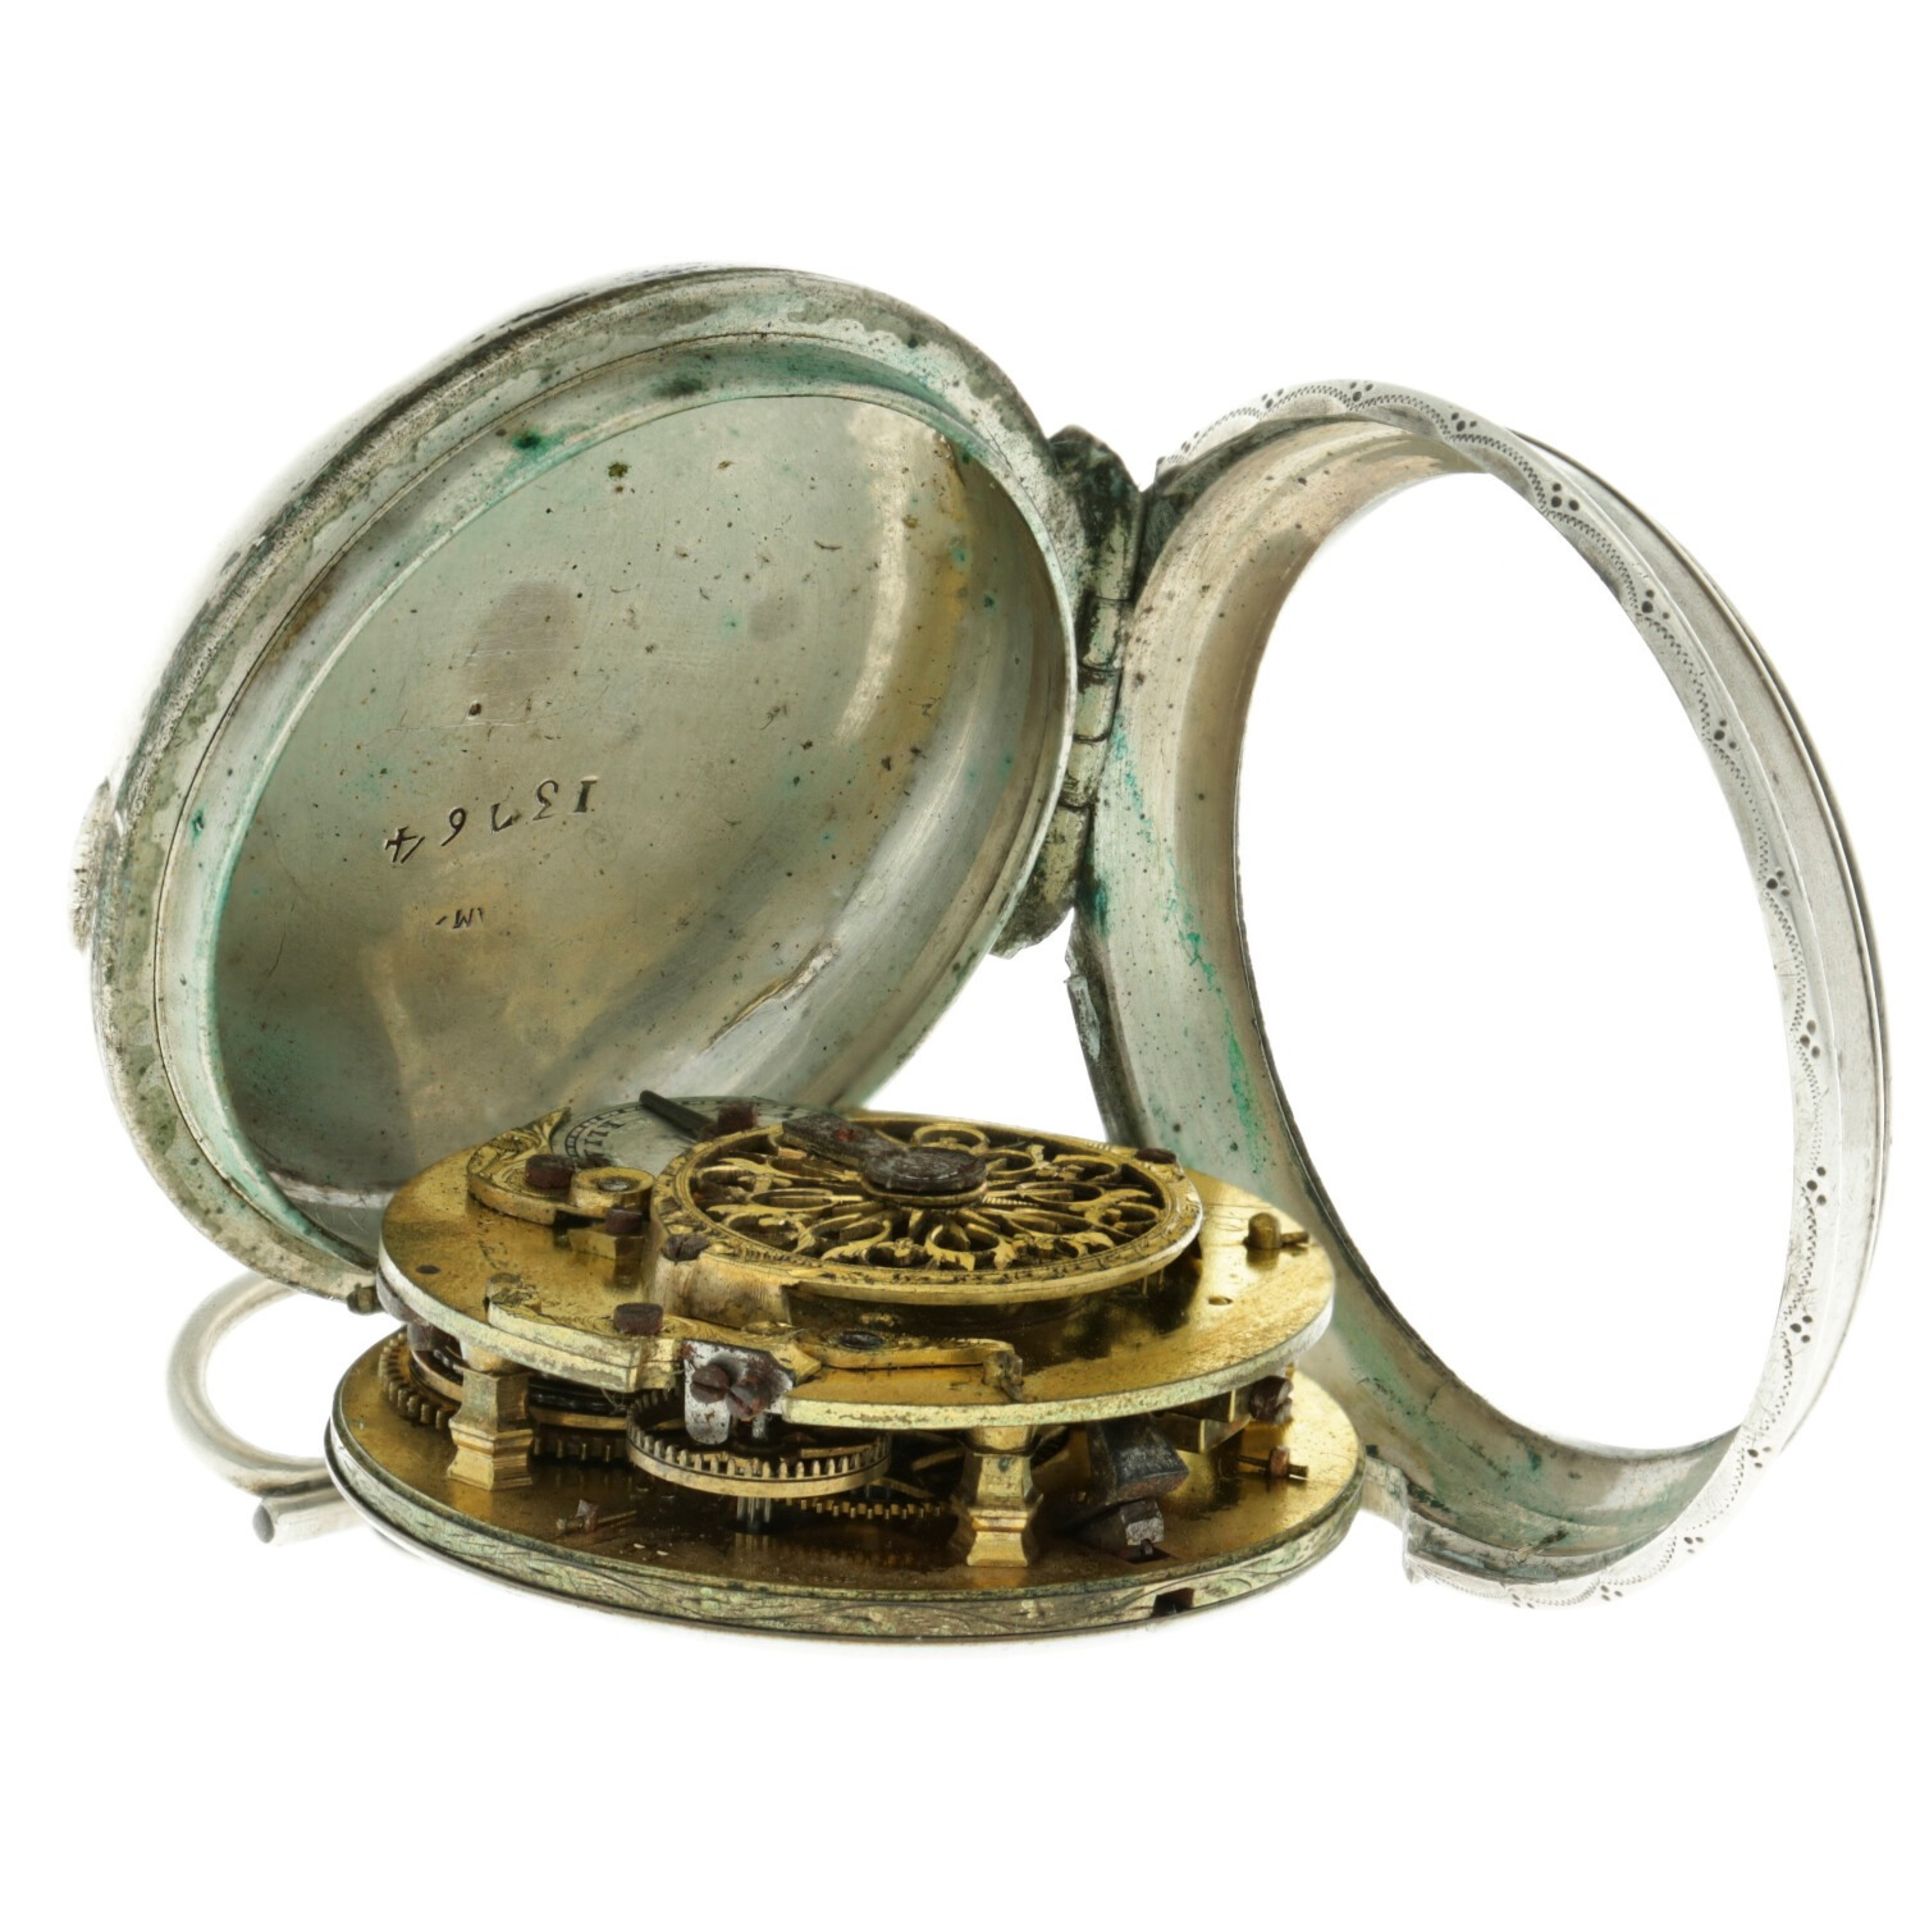 No Reserve - Lambrechts silver (925/1000) Verge Fusee - Men's pocketwatch - approx. 1850 Hasselt, Th - Image 3 of 4